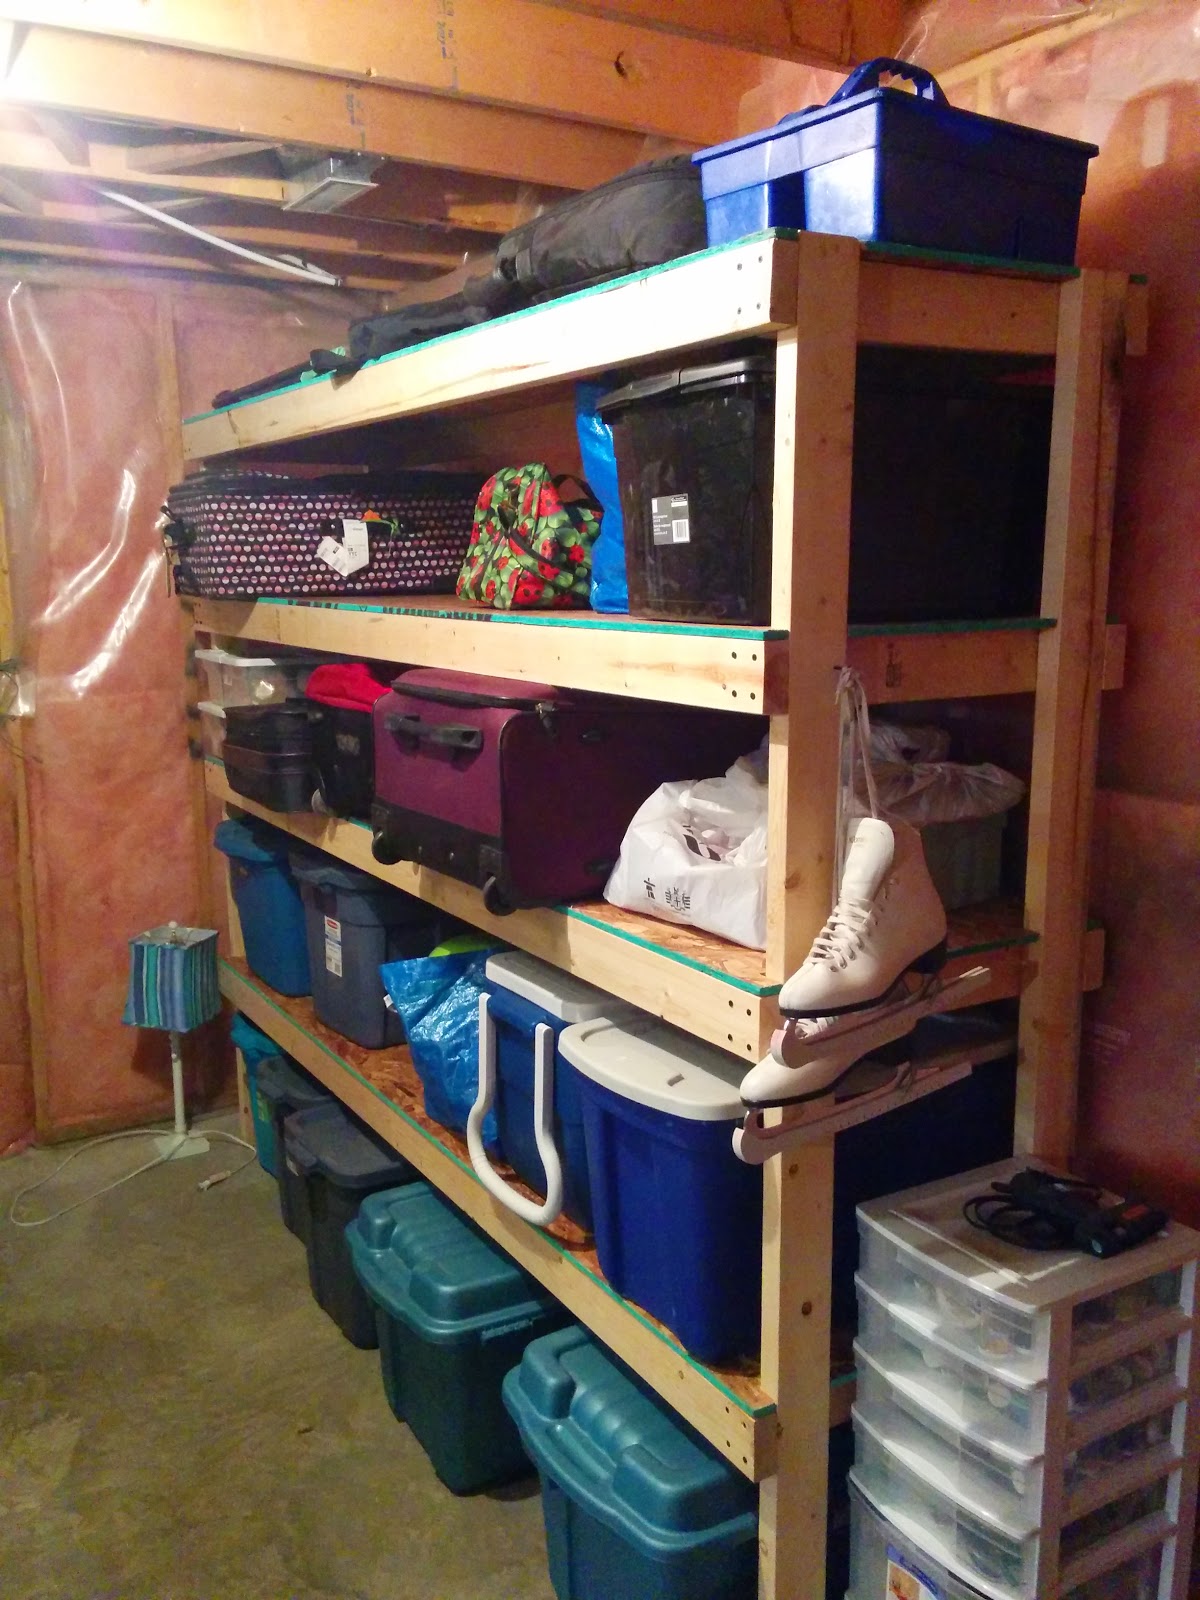 Bees Not Included: Basement Storage Shelves